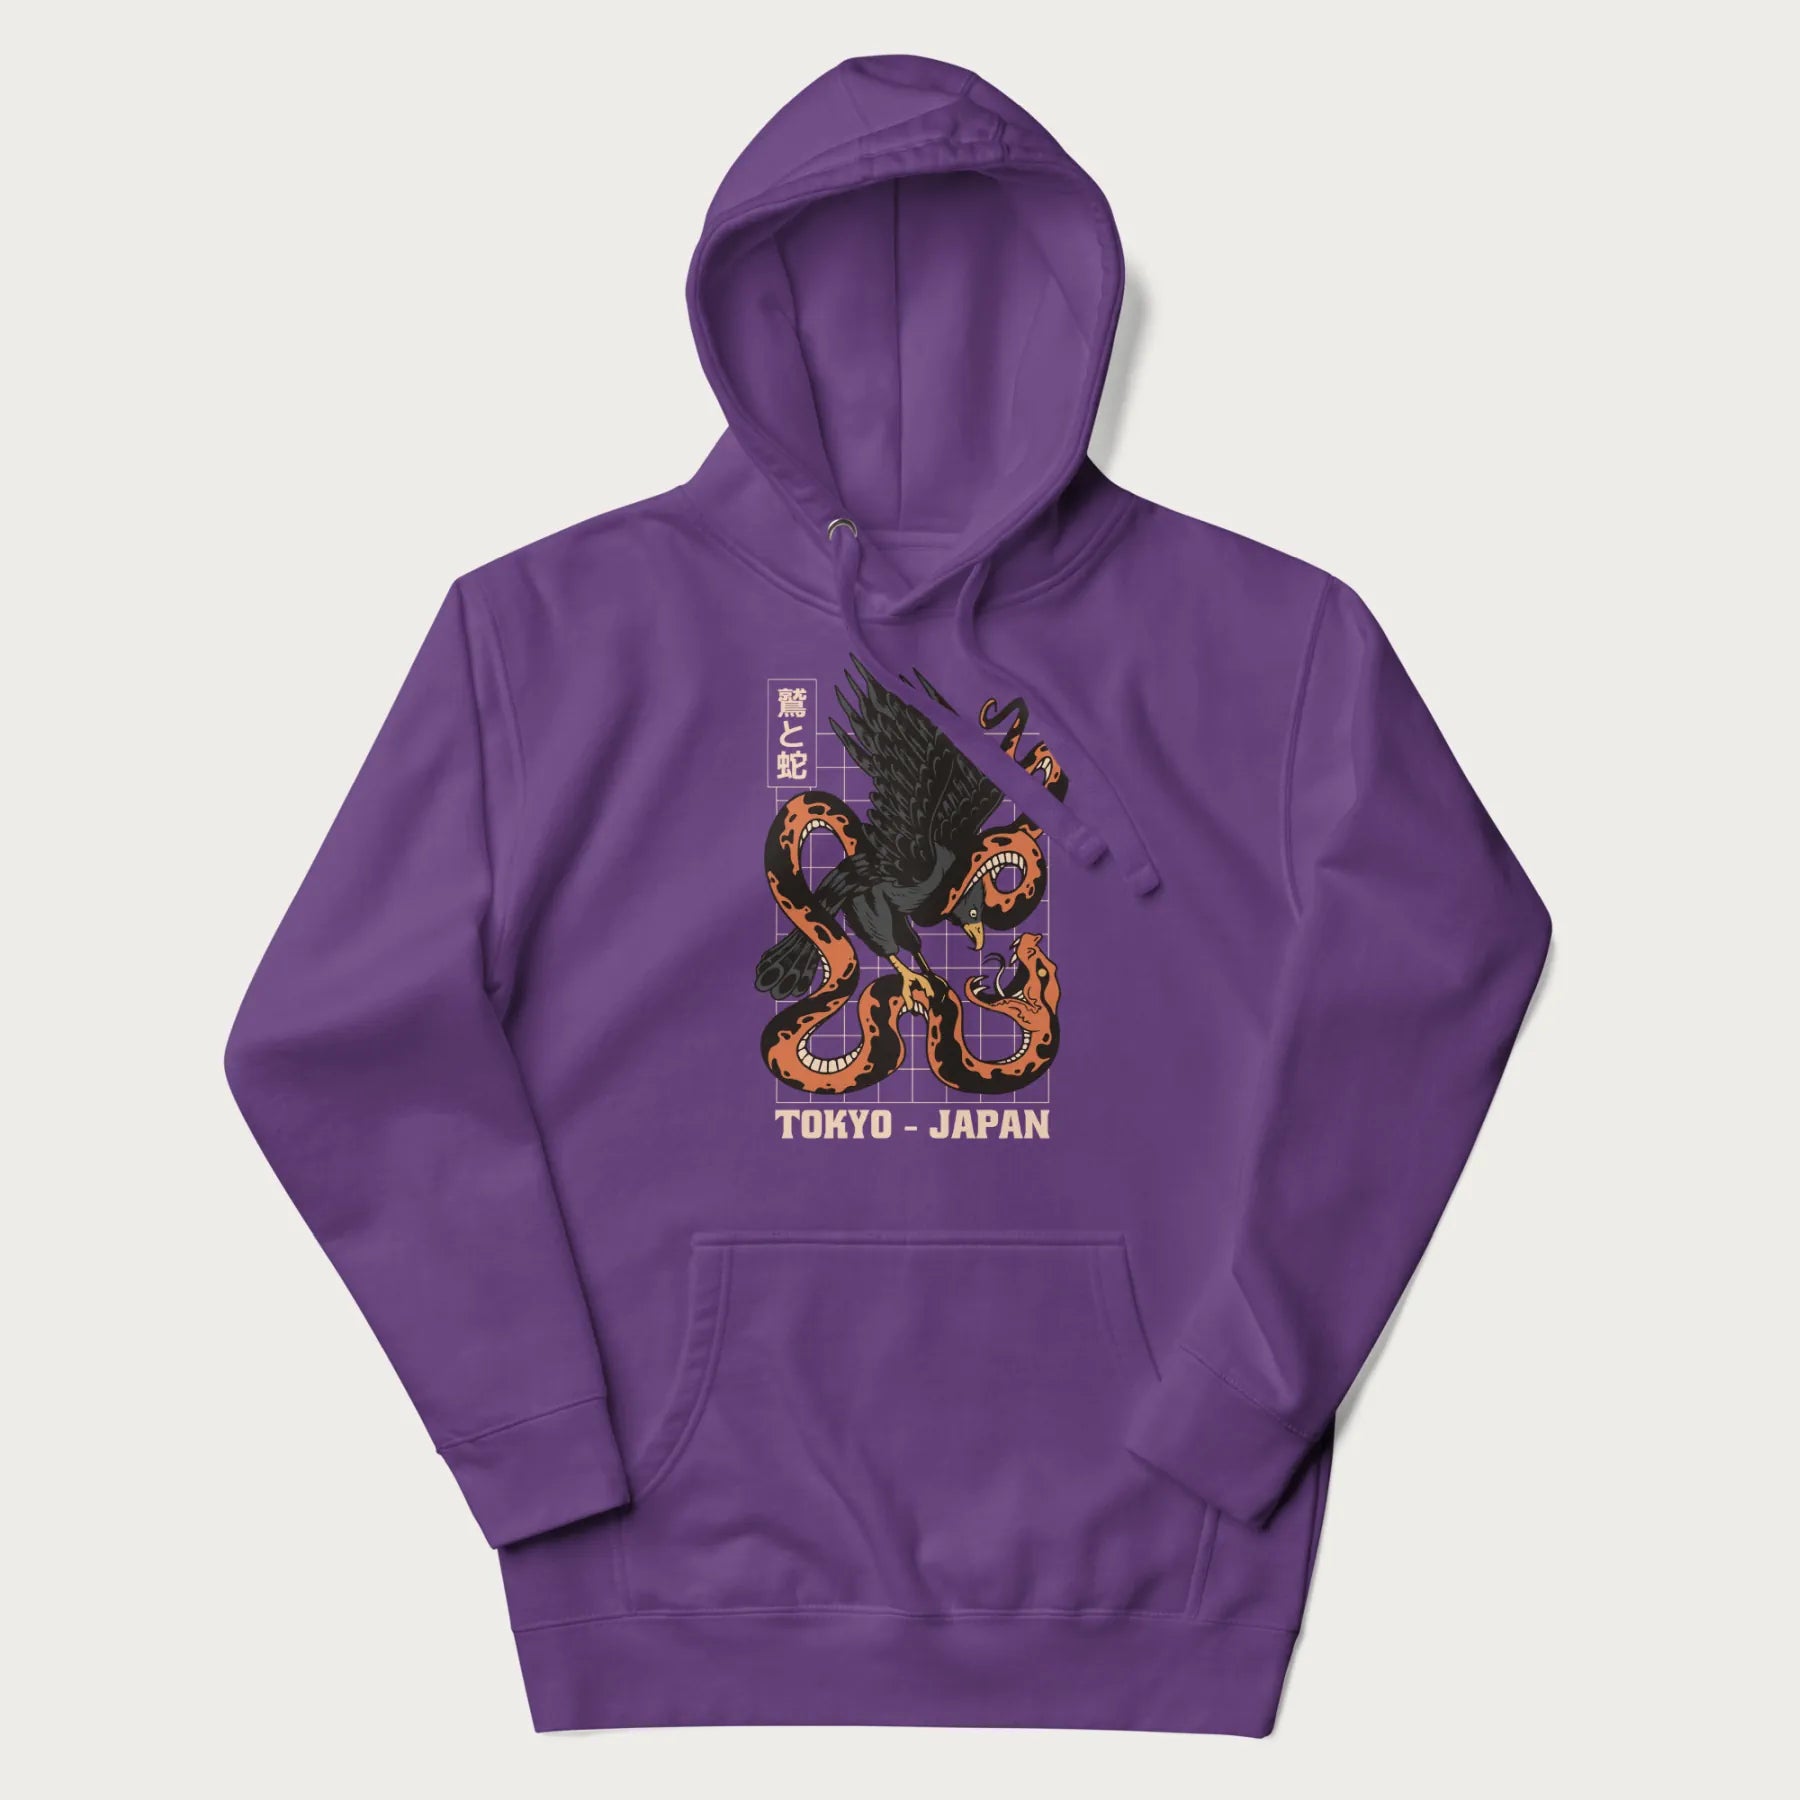 Purple hoodie with Japanese text and a graphic of an eagle battling a snake, with the text 'Tokyo Japan' underneath.